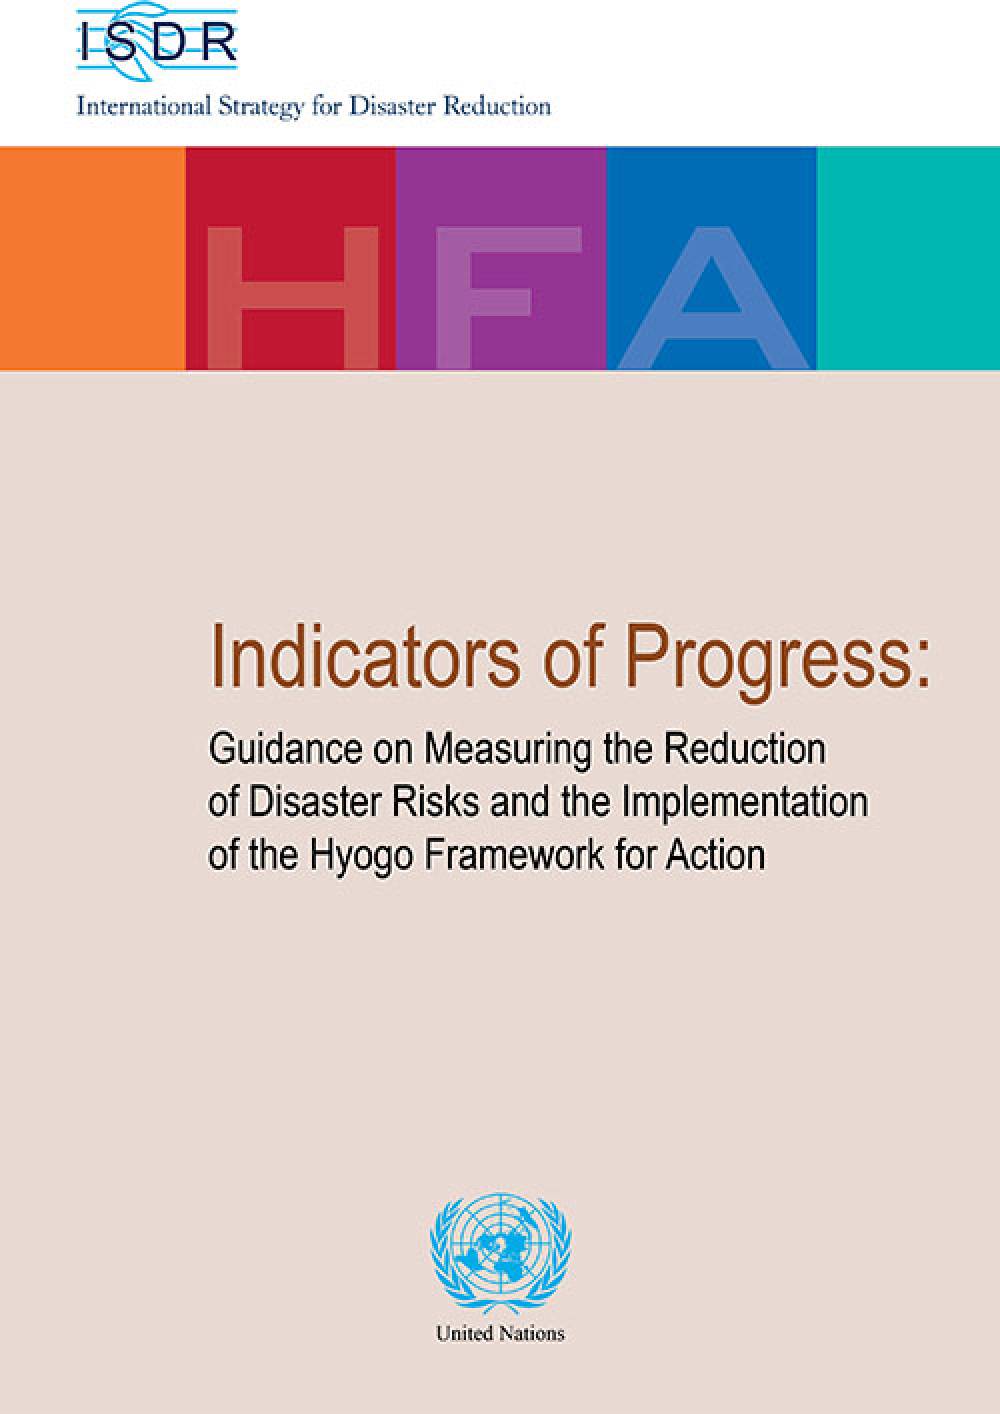 HFA Indicators of progress, Guidelines on measuring the reduction of DRR and implementation of HFA